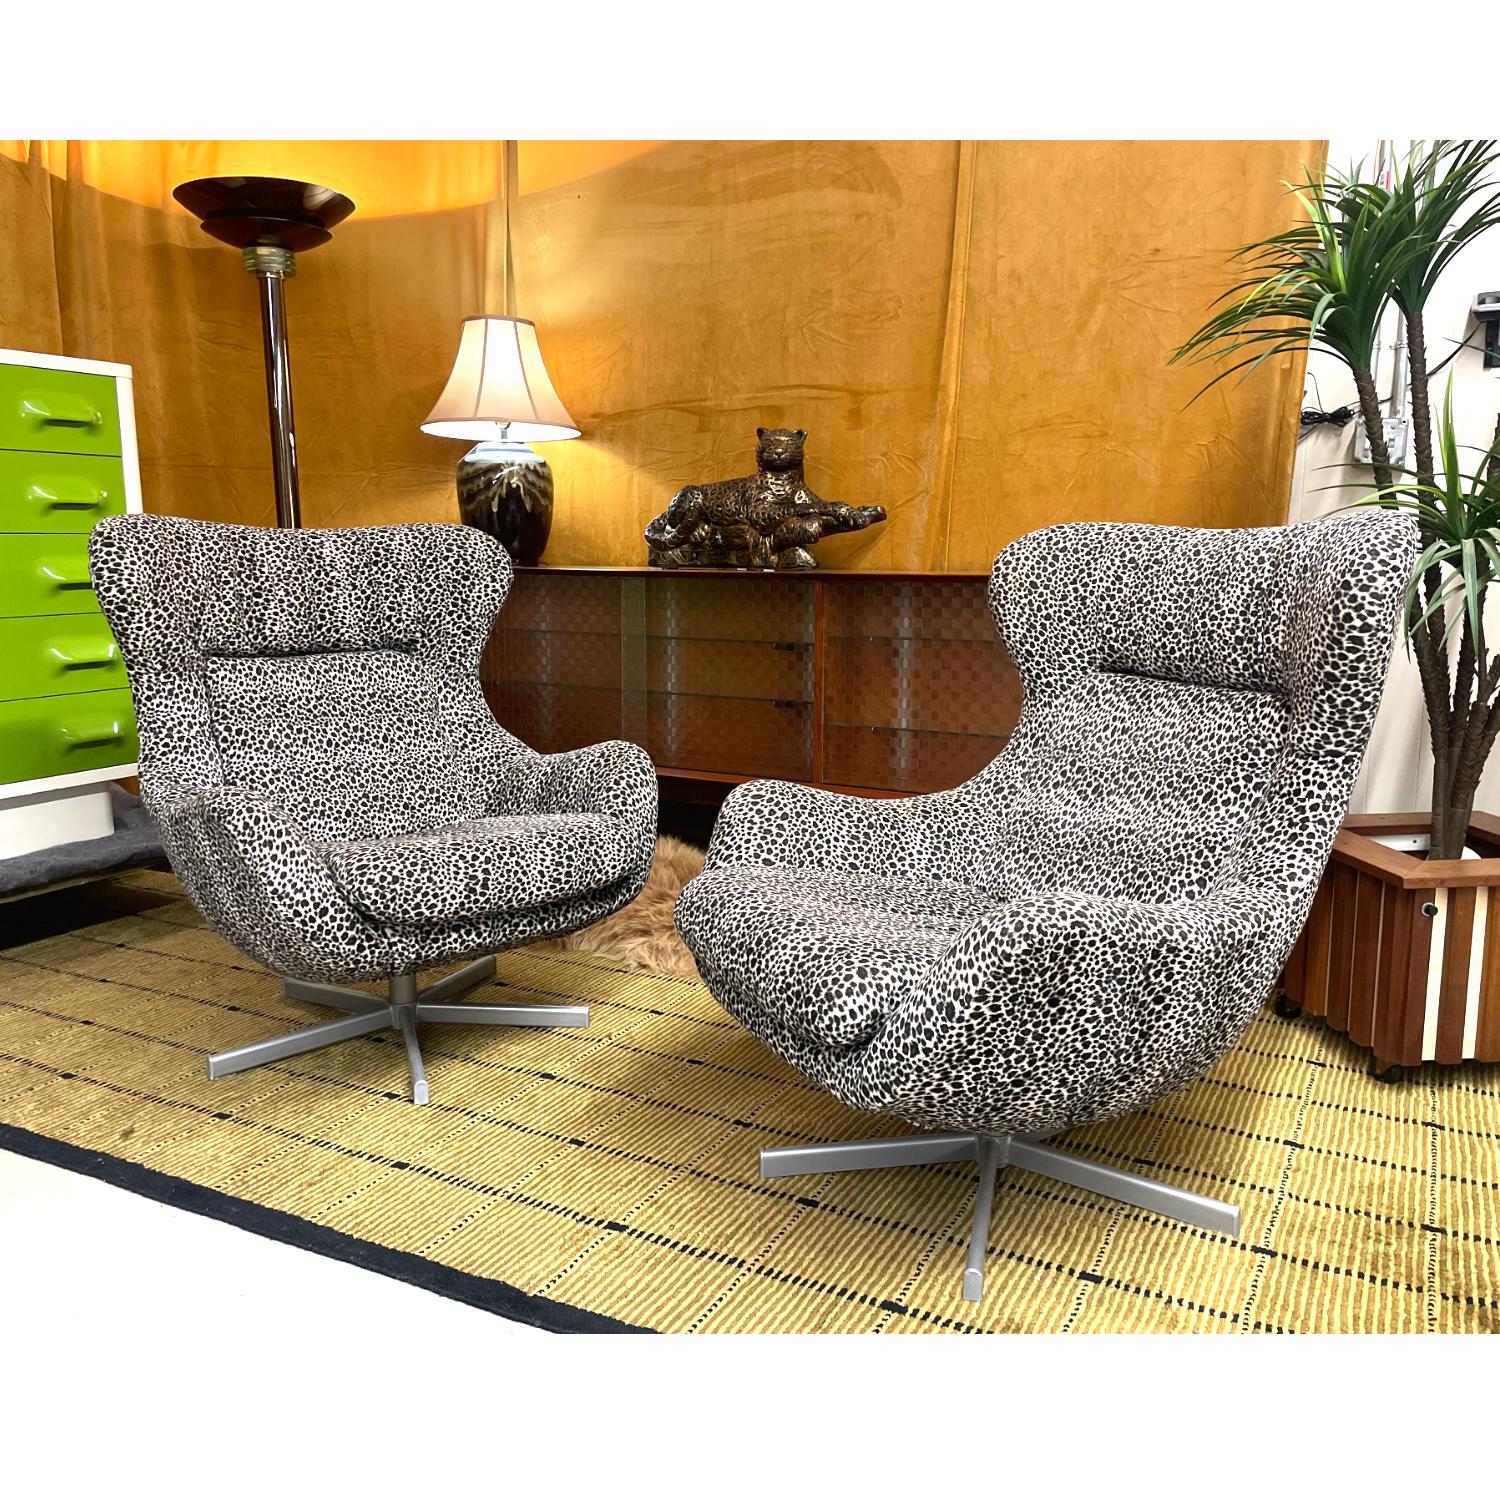 Pair of Vintage Fuzzy Leopard Arne Jacobsen Egg Chair Style Swivel Chairs For Sale 1